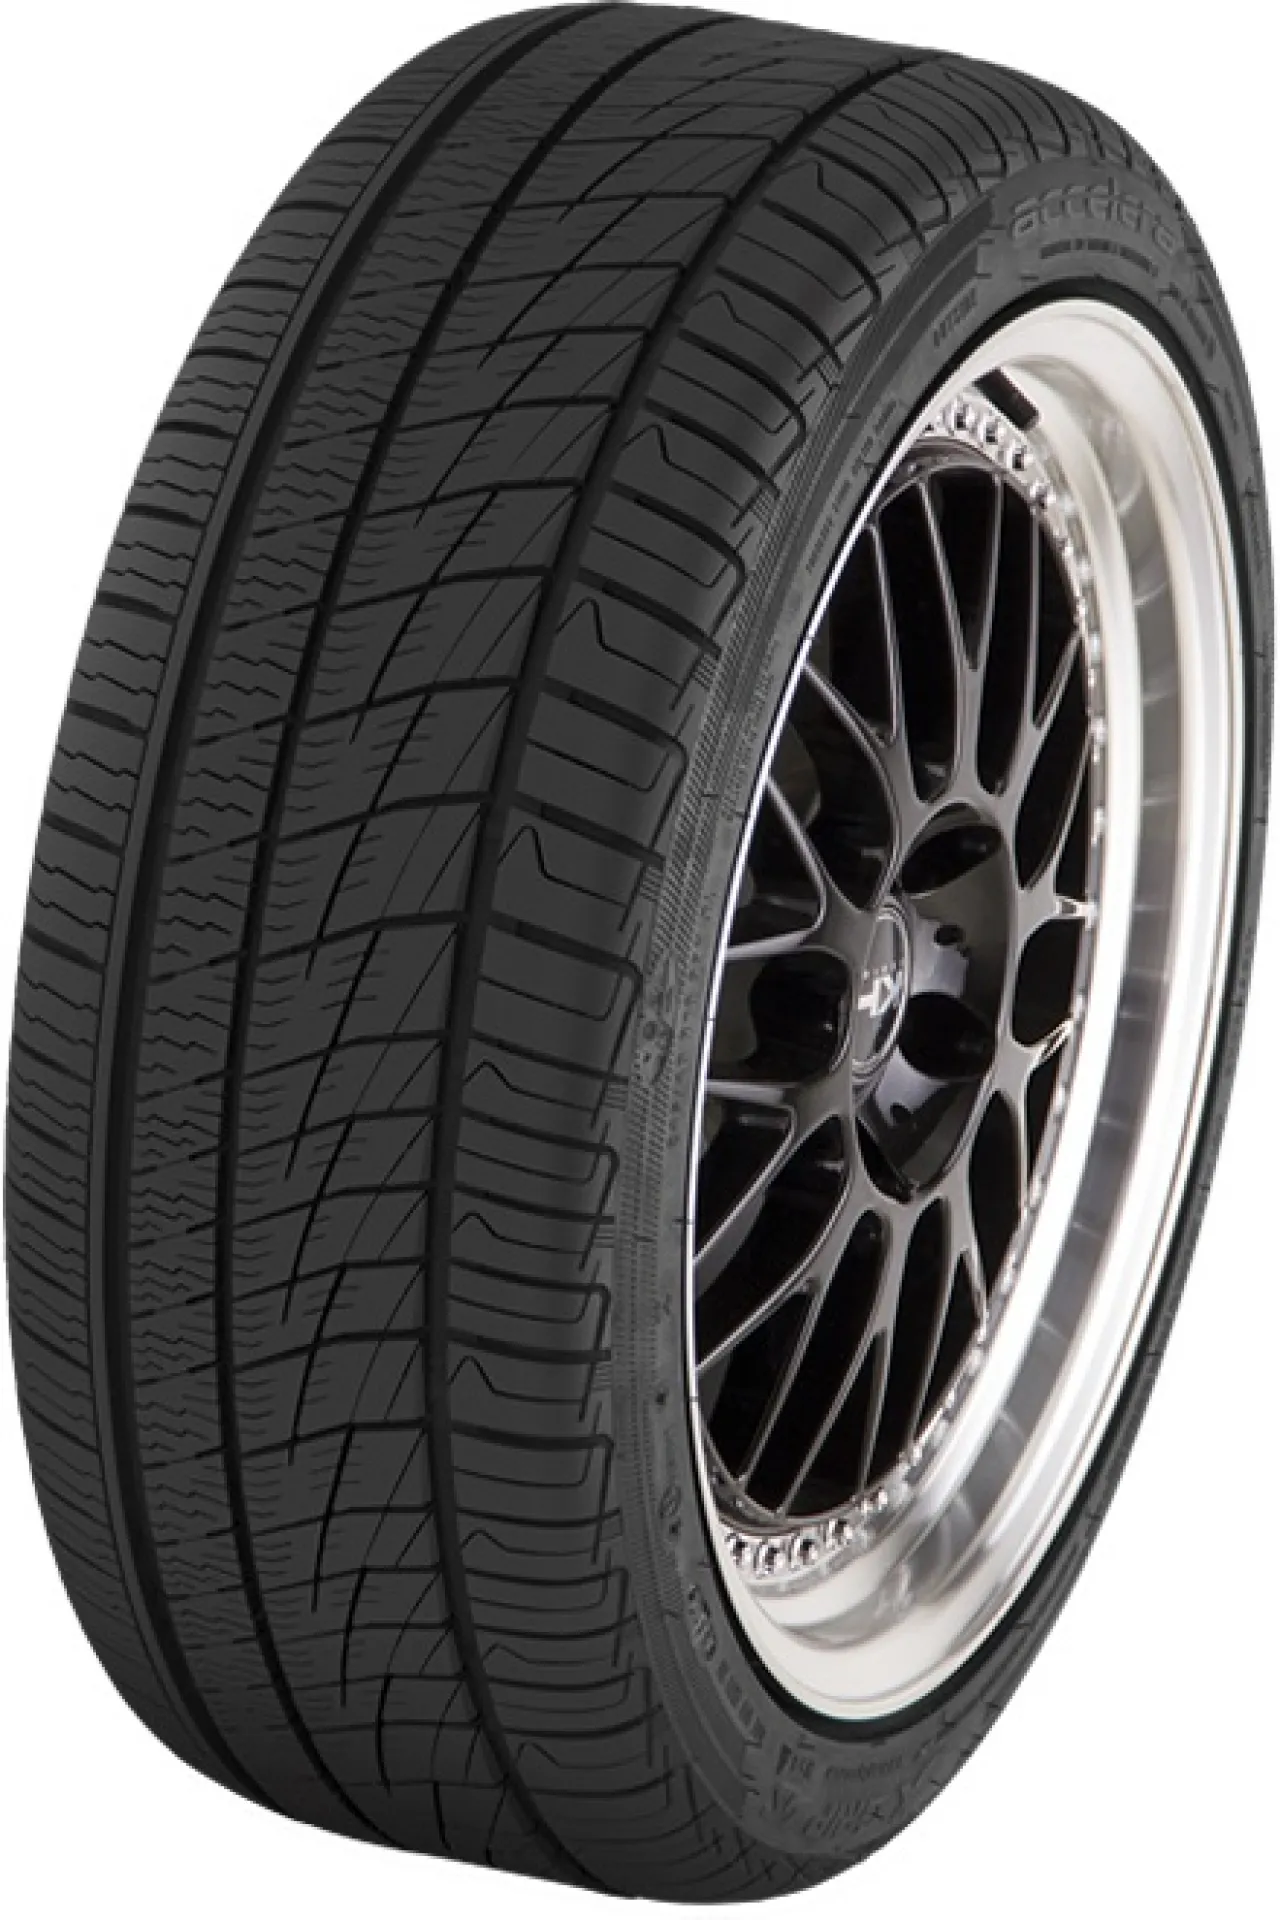 EP Tyres X Grip 4S 245/40R18 97V